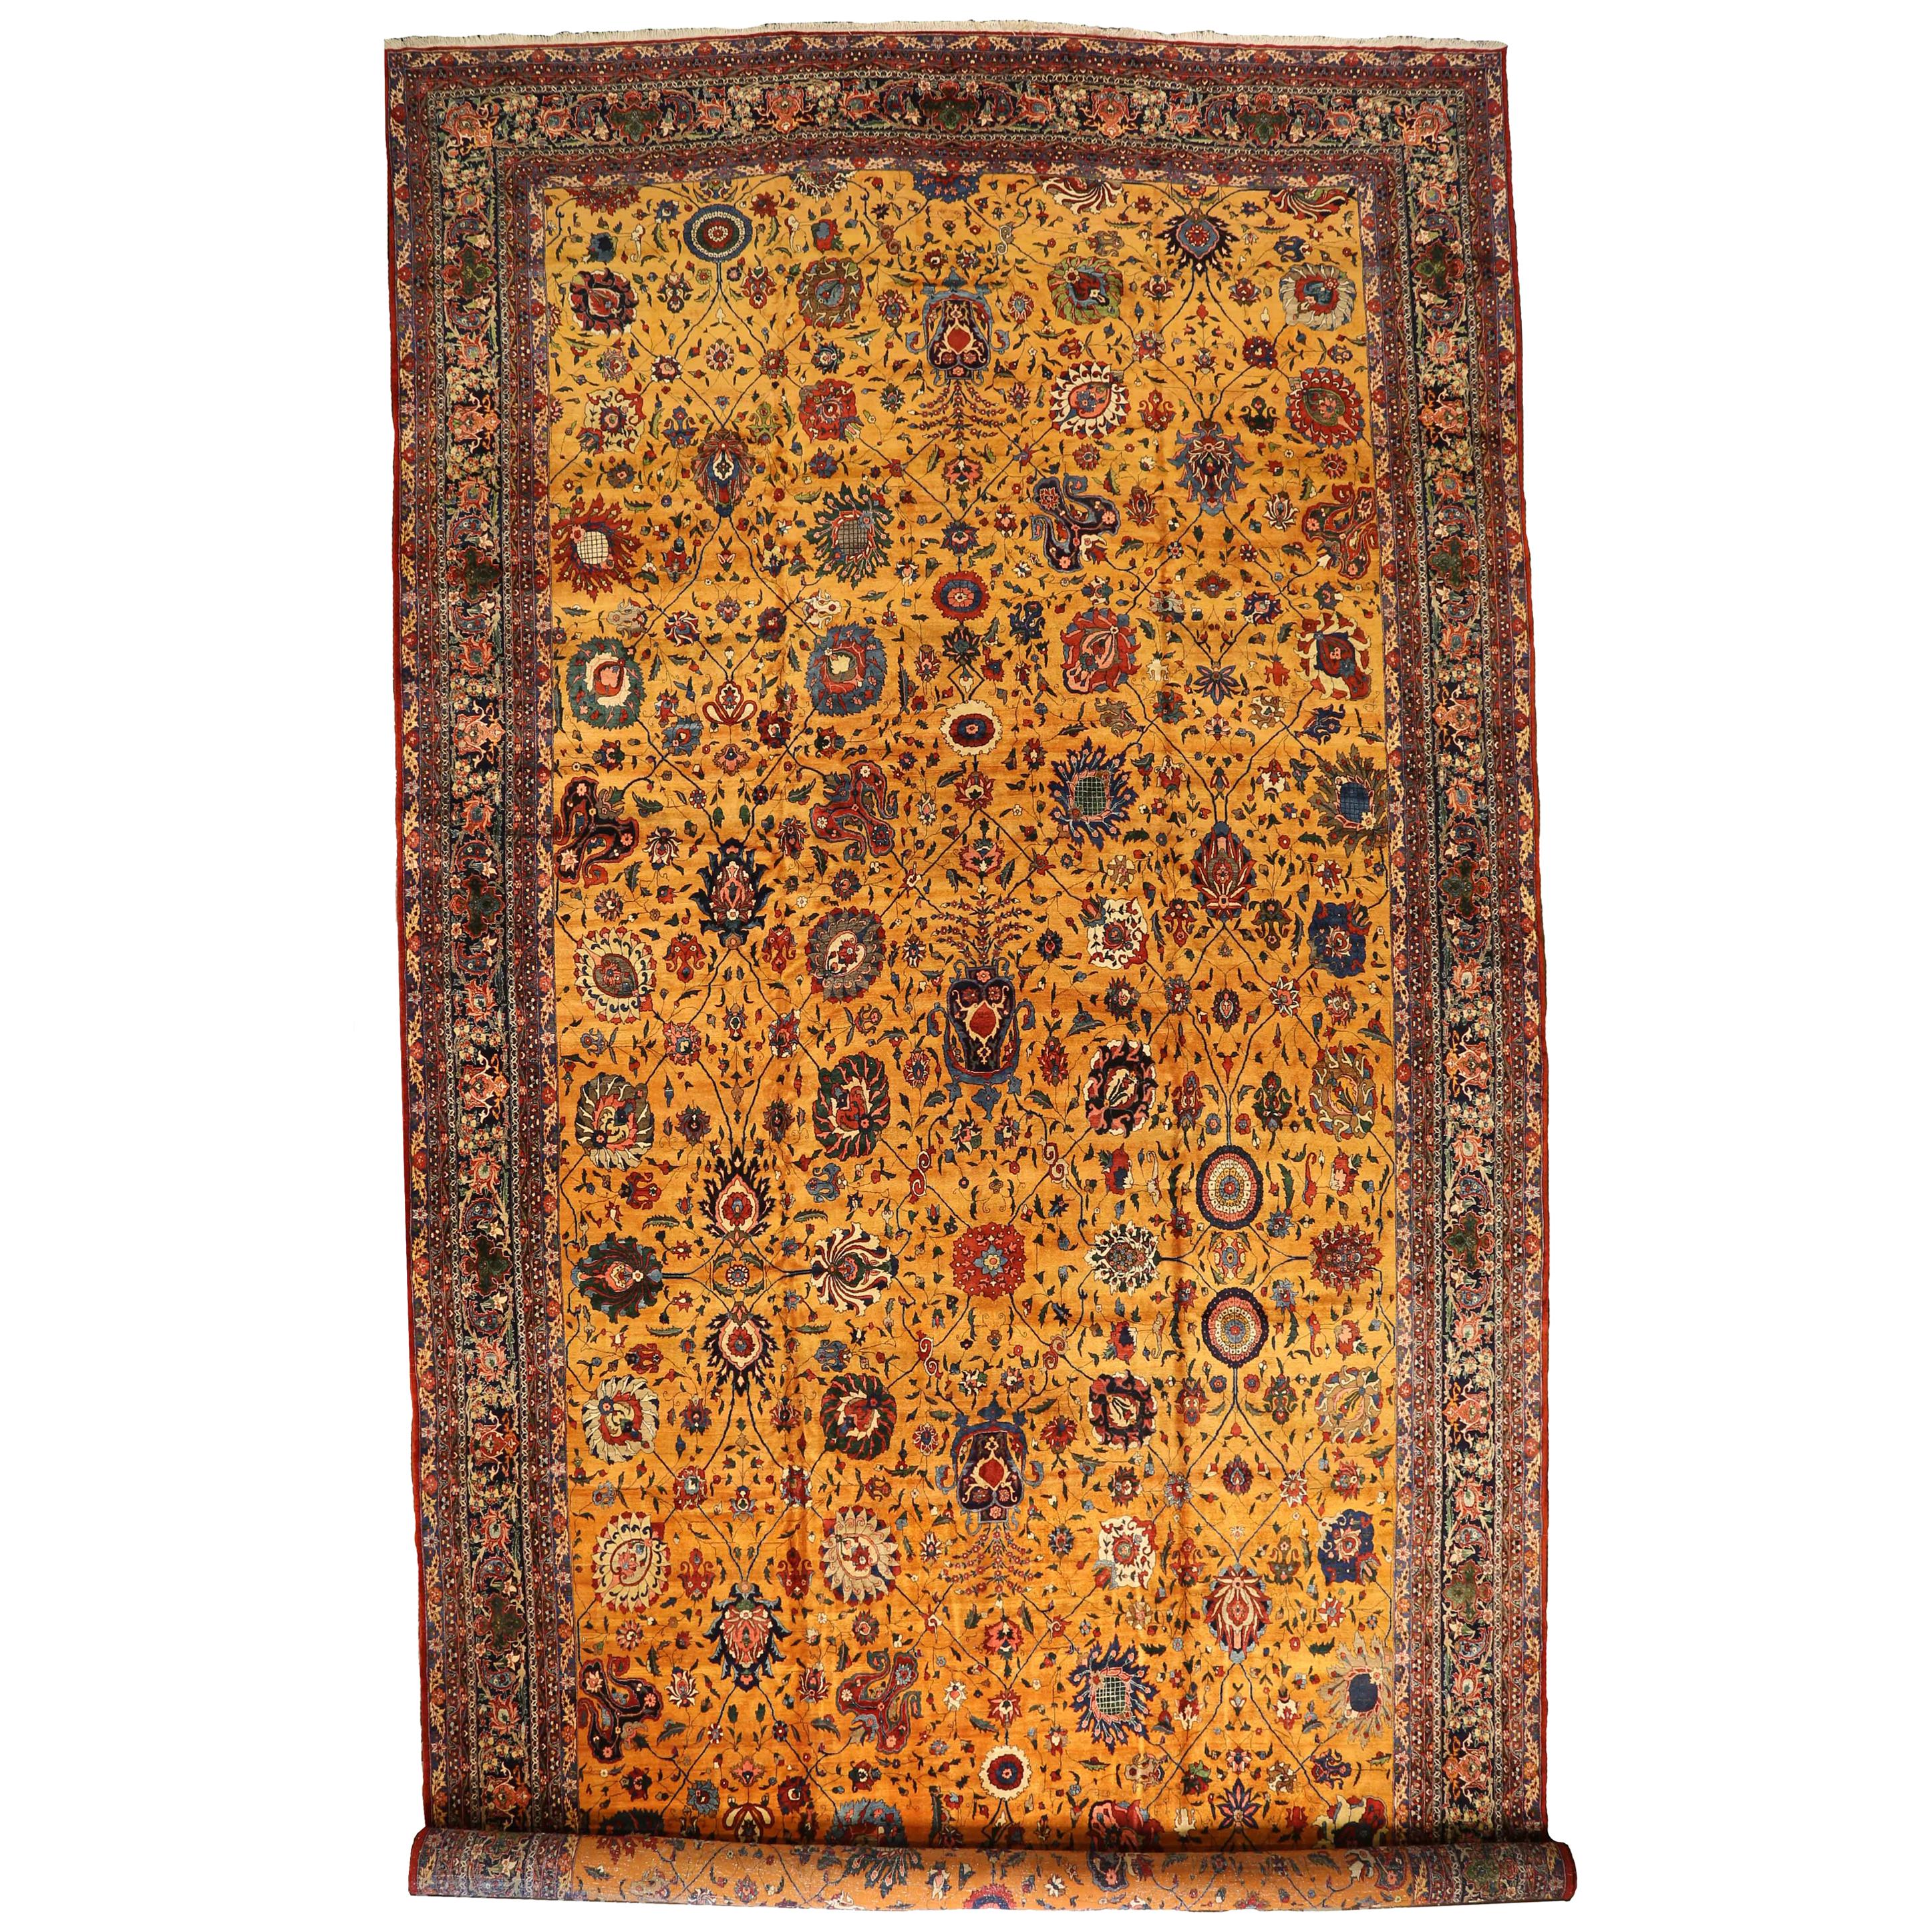 Antique Persian Isfahan Rug with Golden Field and Floral Details, circa 1910s